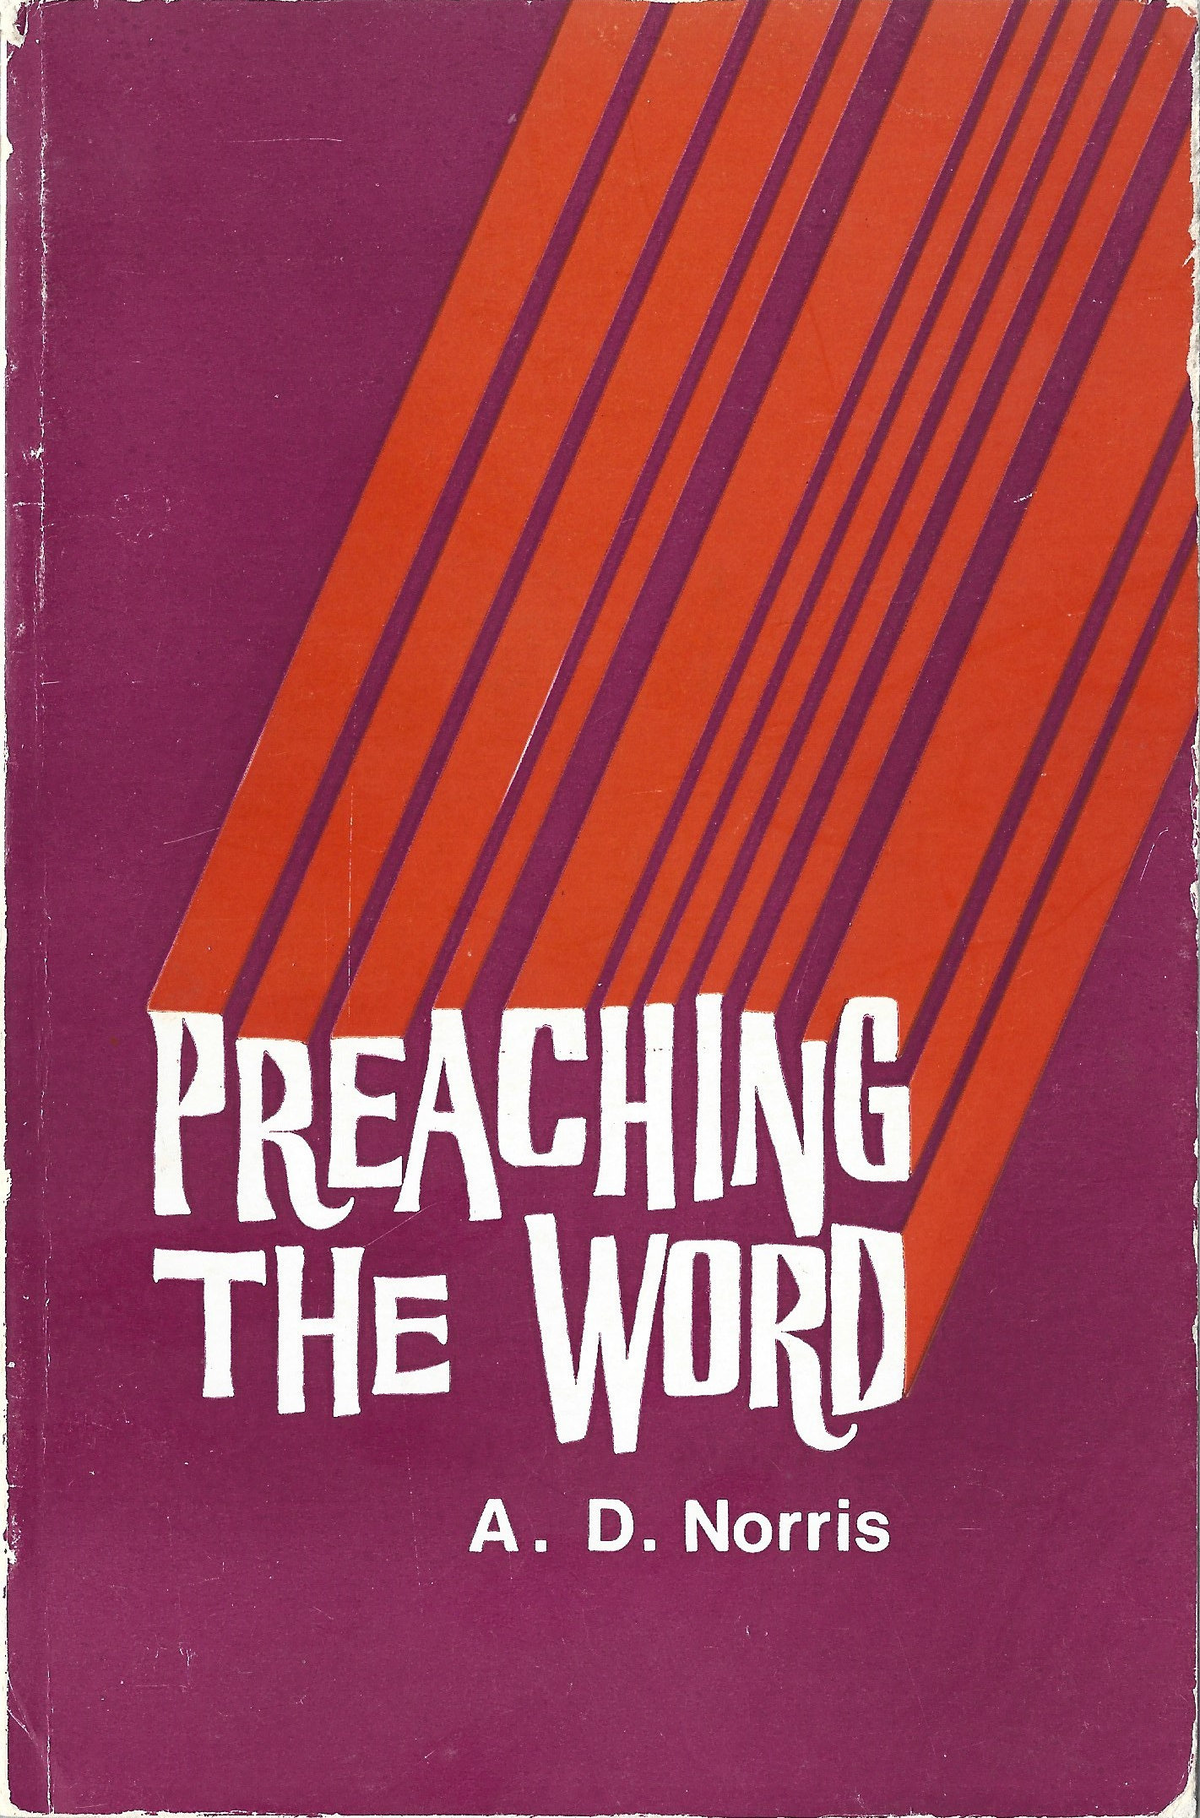 Preaching the Word - Used Book